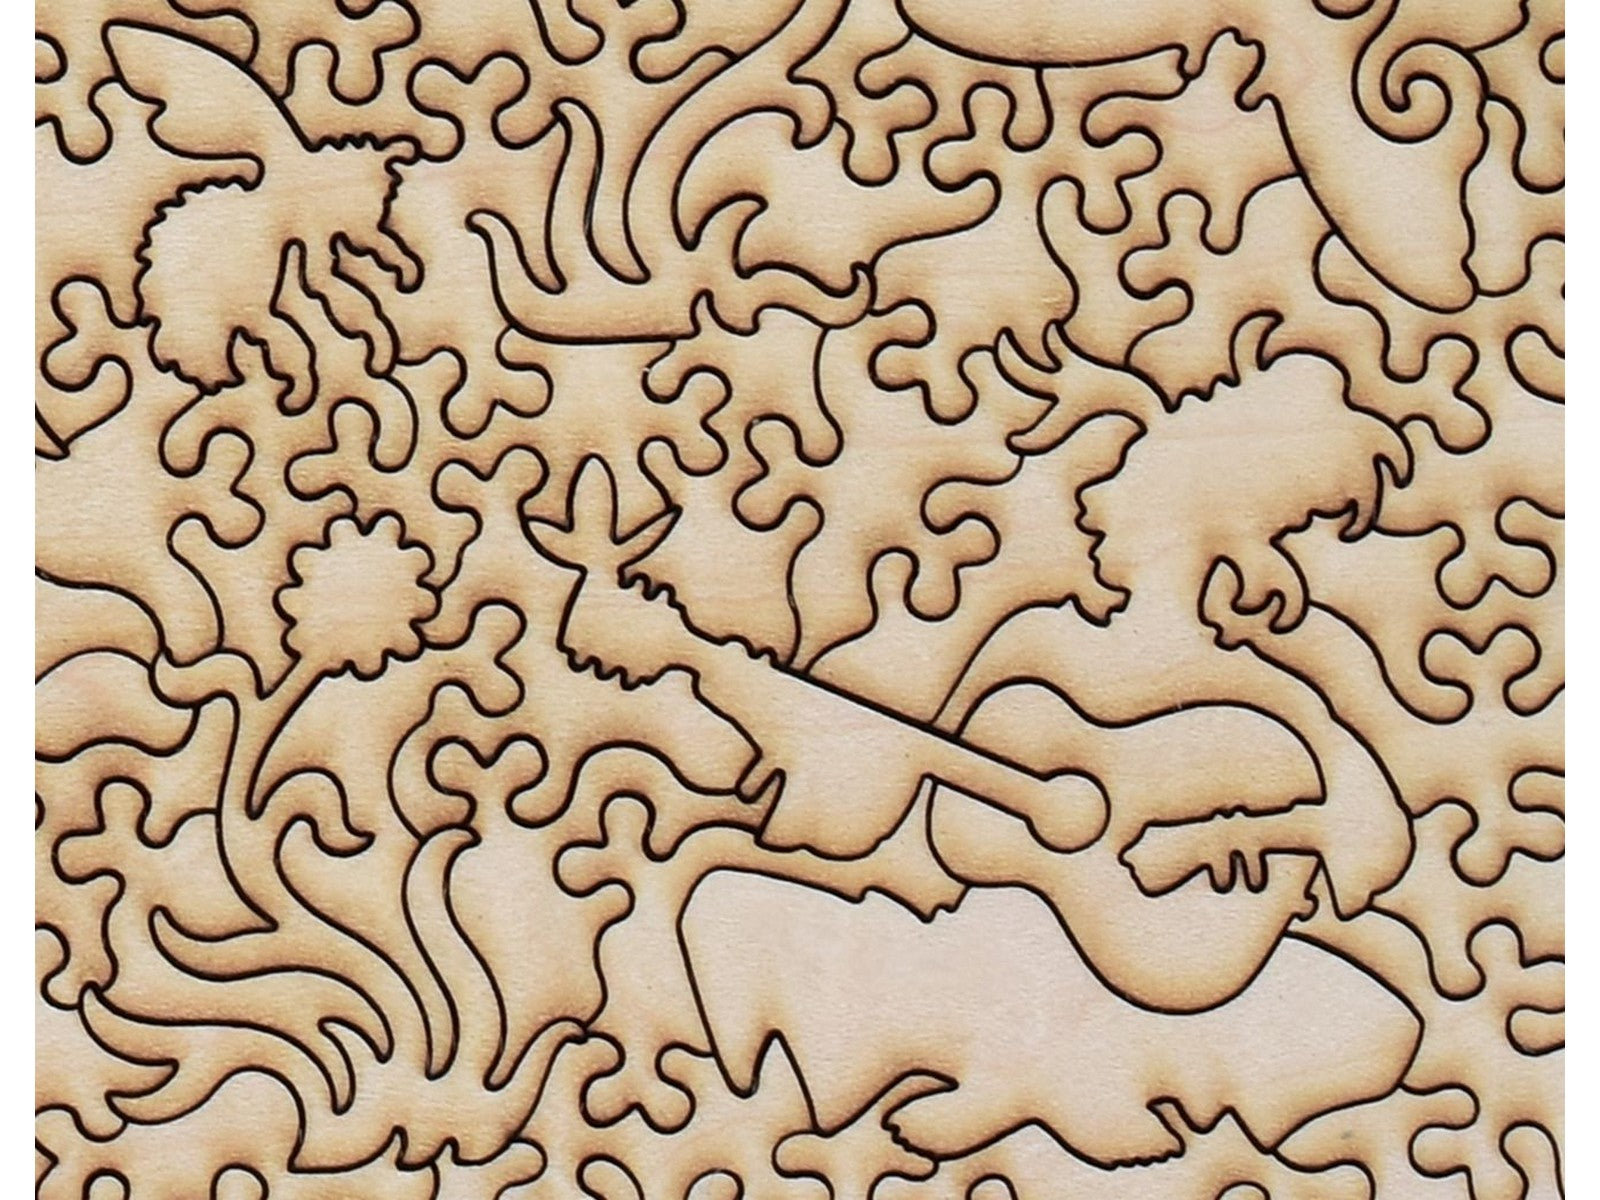 Second image for A closeup of the back of the puzzle, Chautauqua Trail, showing the detail in the pieces.